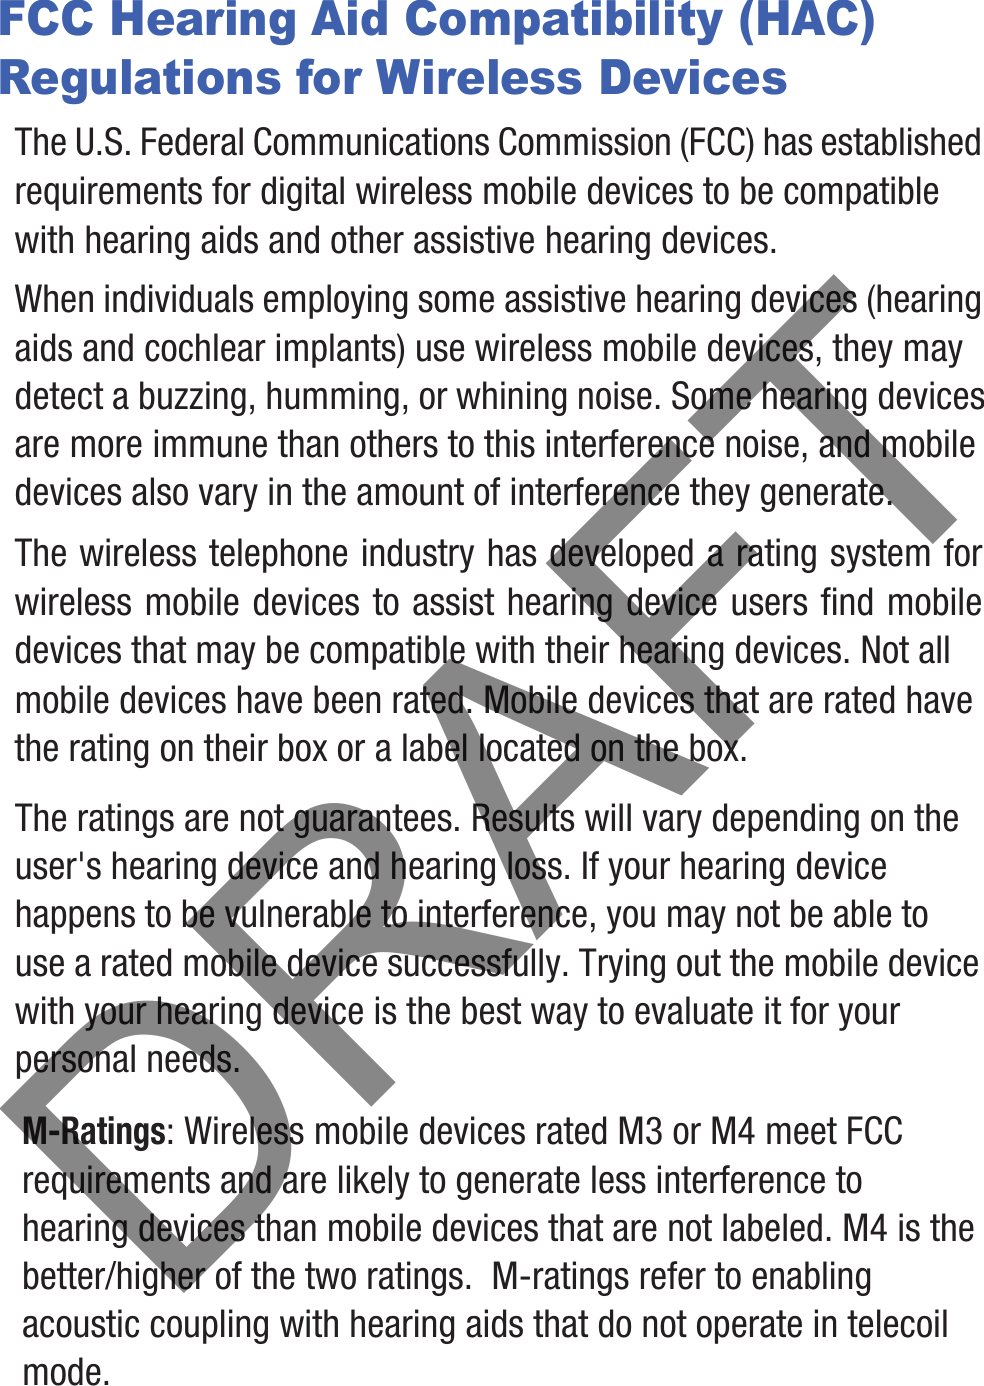 FCC Hearing Aid Compatibility (HAC) Regulations for Wireless DevicesThe U.S. Federal Communications Commission (FCC) has established requirements for digital wireless mobile devices to be compatible with hearing aids and other assistive hearing devices.When individuals employing some assistive hearing devices (hearing aids and cochlear implants) use wireless mobile devices, they may detect a buzzing, humming, or whining noise. Some hearing devices are more immune than others to this interference noise, and mobile devices also vary in the amount of interference they generate.The wireless telephone industry has developed a rating system for wireless mobile devices to assist hearing device users find mobile devices that may be compatible with their hearing devices. Not all mobile devices have been rated. Mobile devices that are rated have the rating on their box or a label located on the box.The ratings are not guarantees. Results will vary depending on the user&apos;s hearing device and hearing loss. If your hearing device happens to be vulnerable to interference, you may not be able to use a rated mobile device successfully. Trying out the mobile device with your hearing device is the best way to evaluate it for your personal needs.M-Ratings: Wireless mobile devices rated M3 or M4 meet FCC requirements and are likely to generate less interference to hearing devices than mobile devices that are not labeled. M4 is the better/higher of the two ratings.  M-ratings refer to enabling acoustic coupling with hearing aids that do not operate in telecoil mode.DRAFT